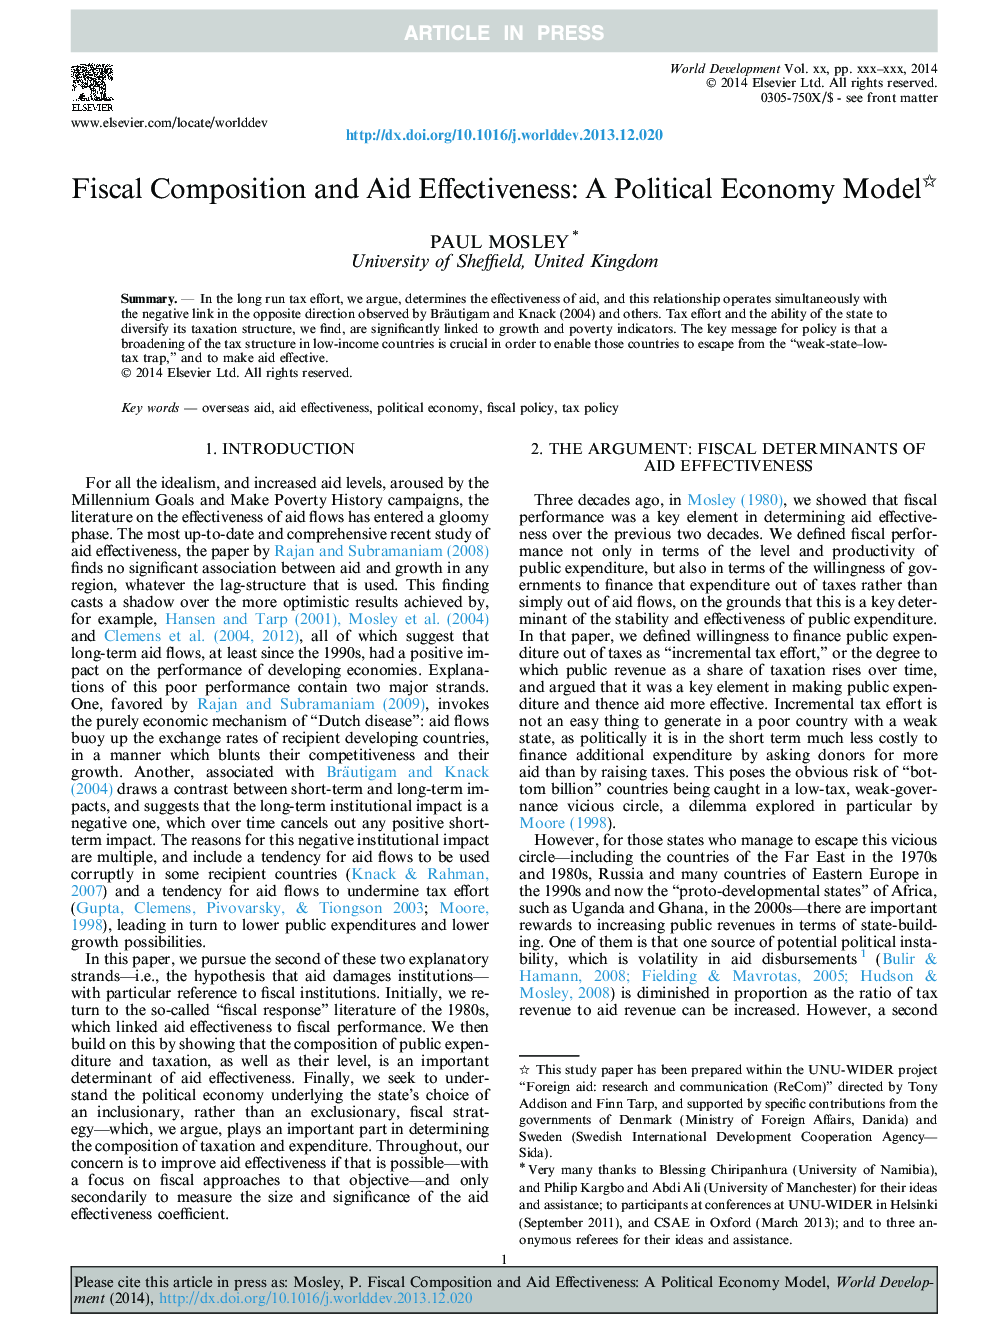 Fiscal Composition and Aid Effectiveness: A Political Economy Model